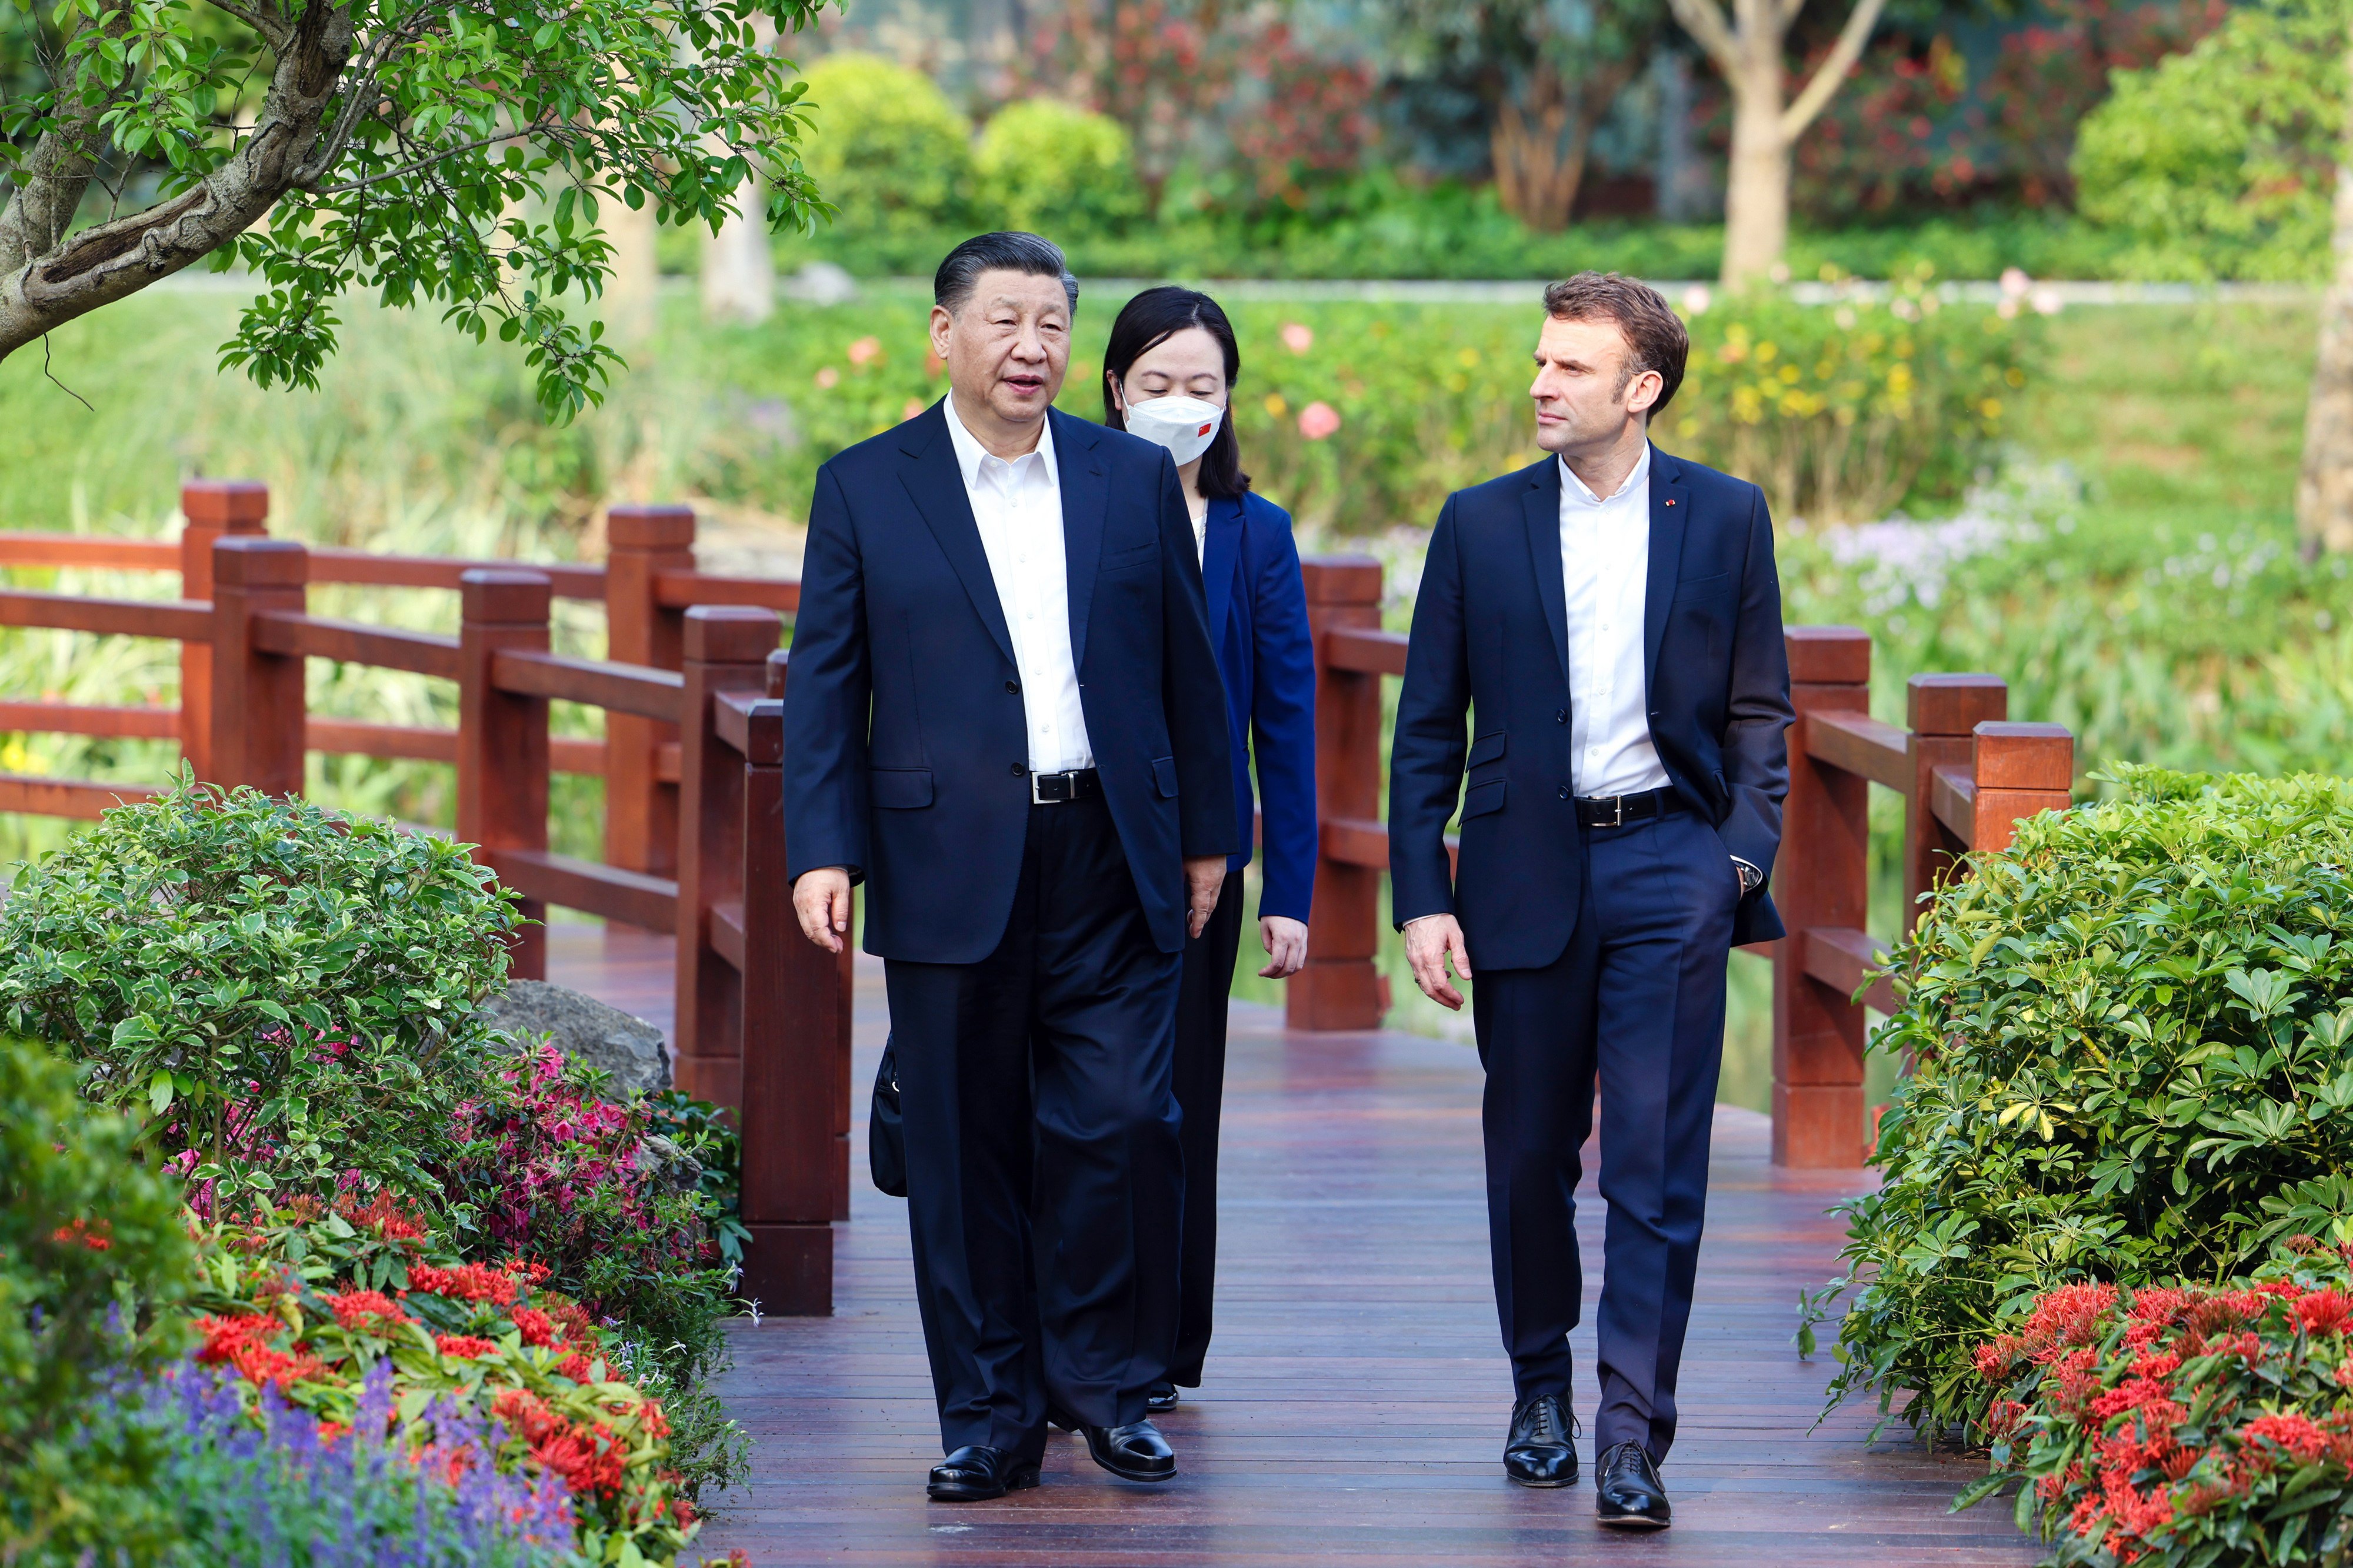 Chinese President Xi Jinping and French President Emmanuel Macron chat during a stroll through the Pine Garden in Guangzhou in southeastern China’s Guangdong province in April 2023. Photo: Xinhua